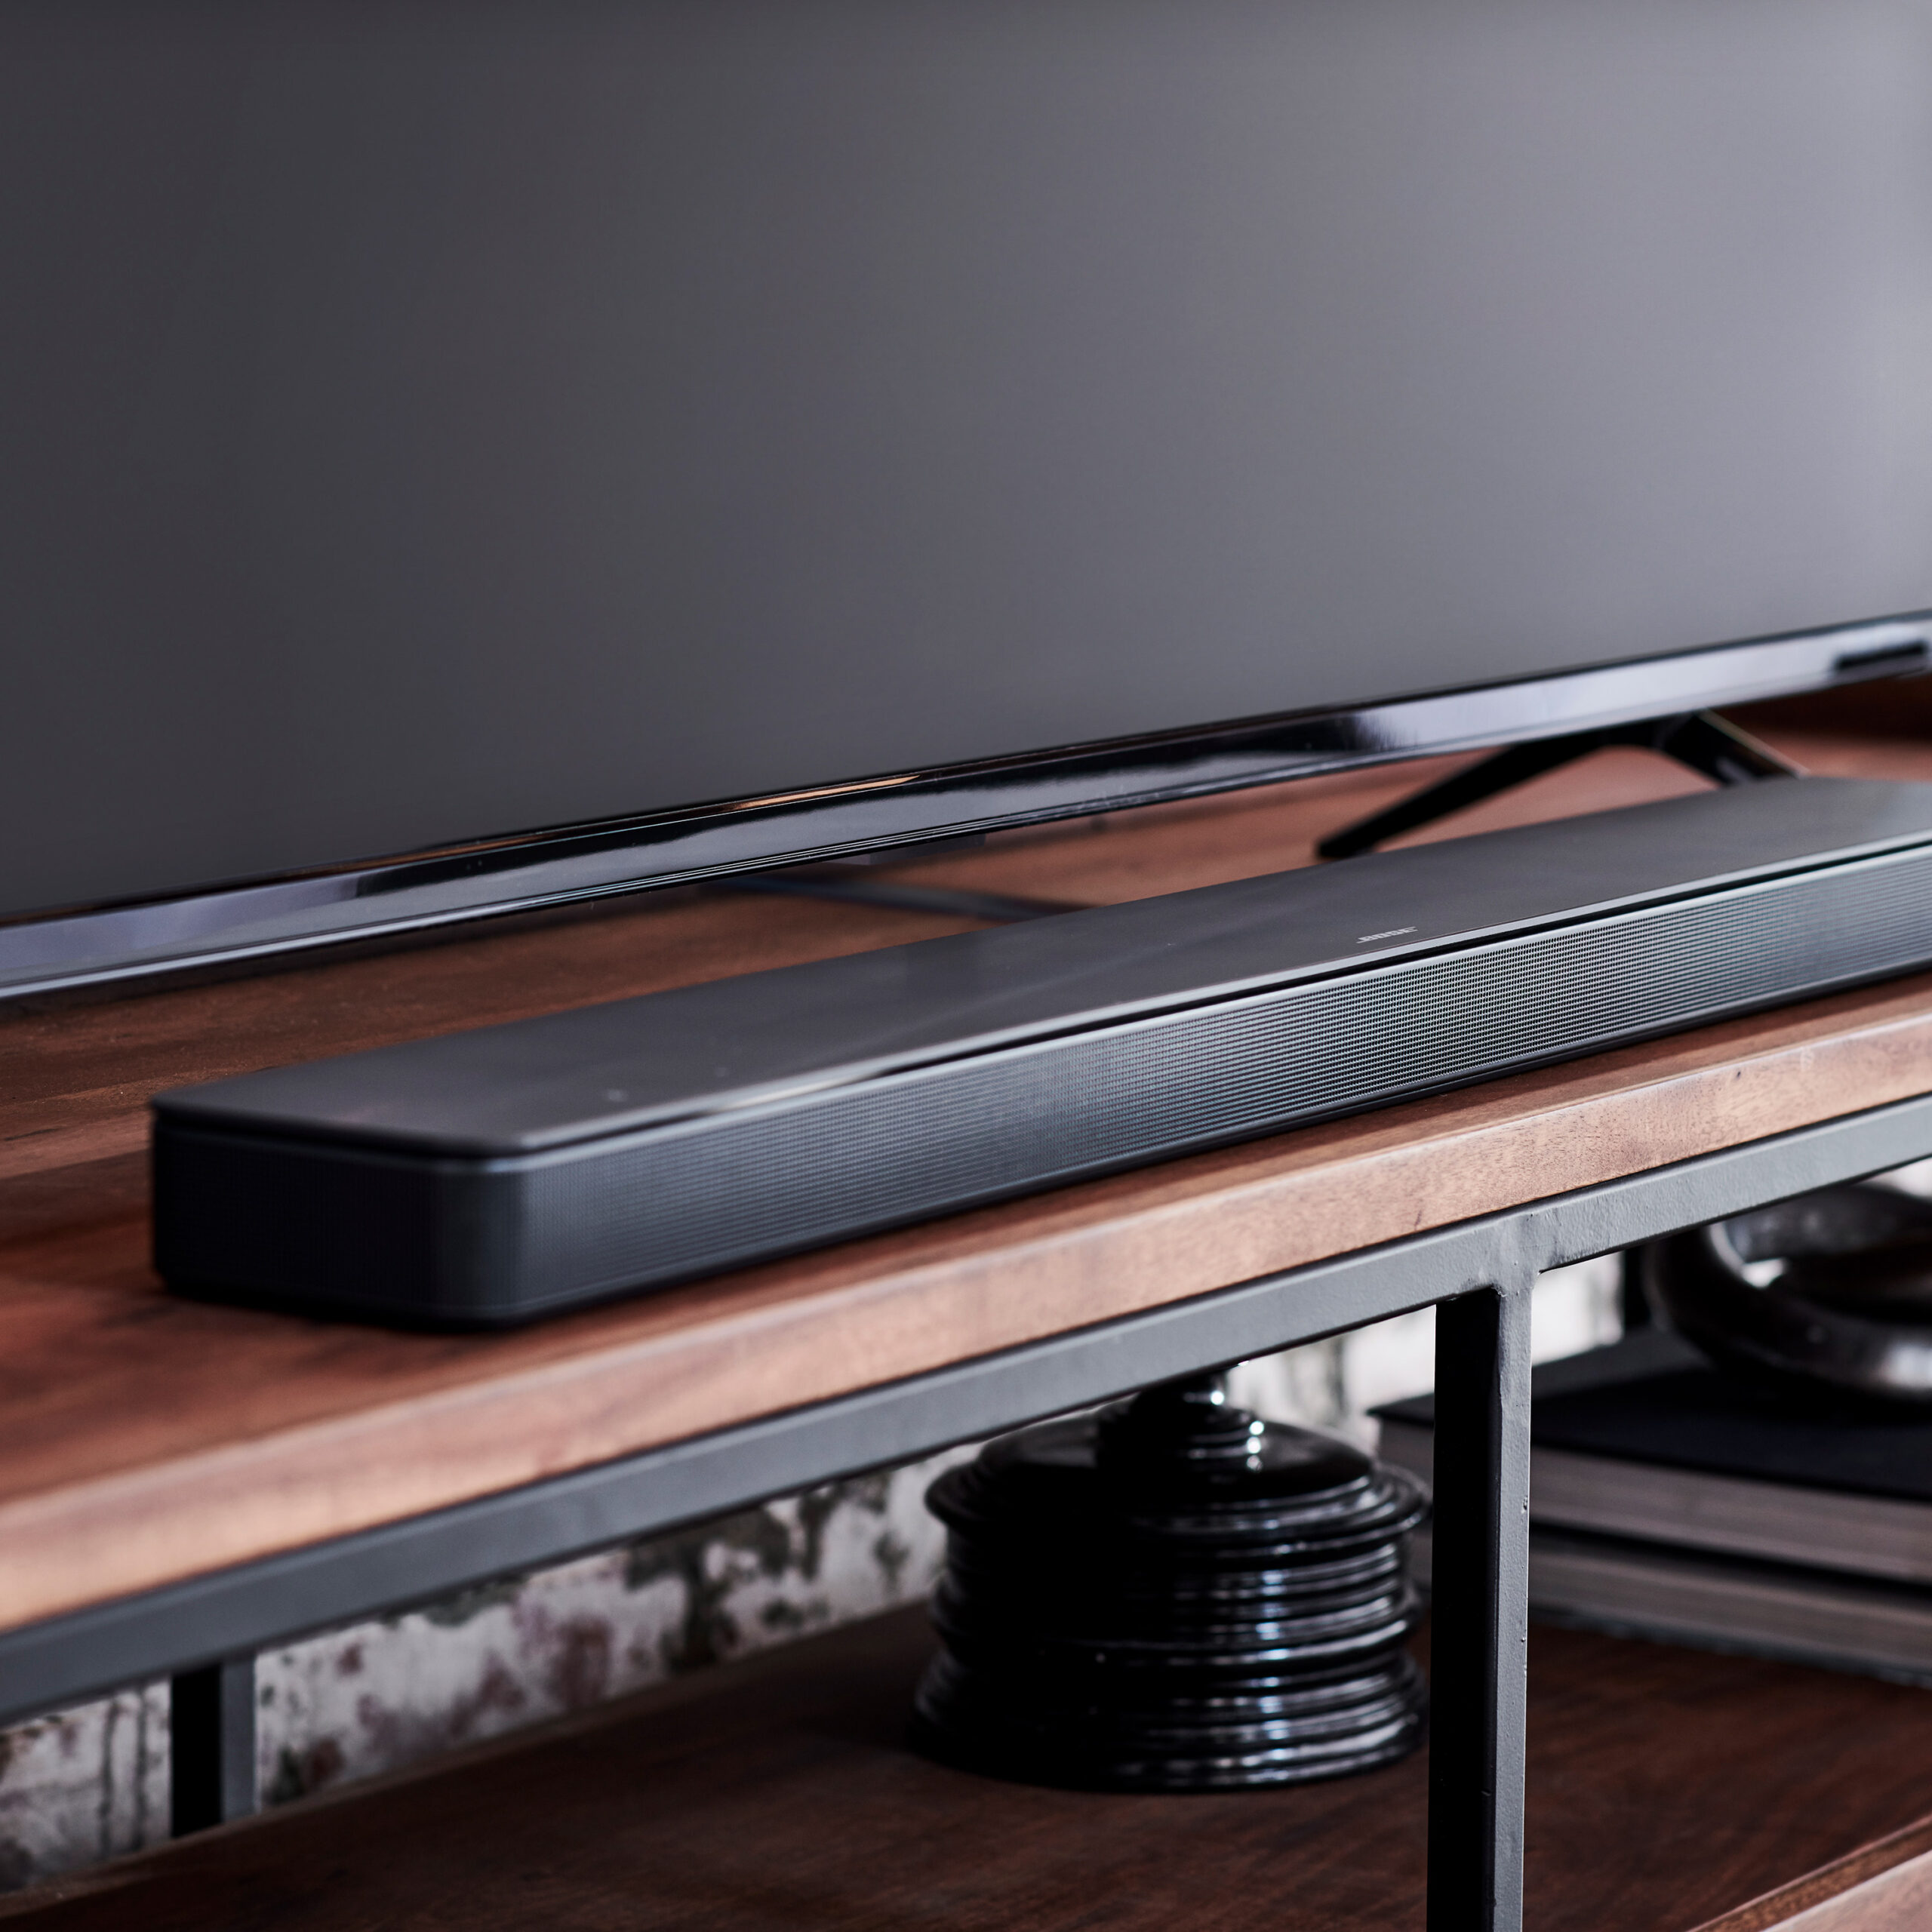 Product image of the Bose Souundbar 500 from Bose press release. The soundbar sits ona wood TV stand with a TV above it.